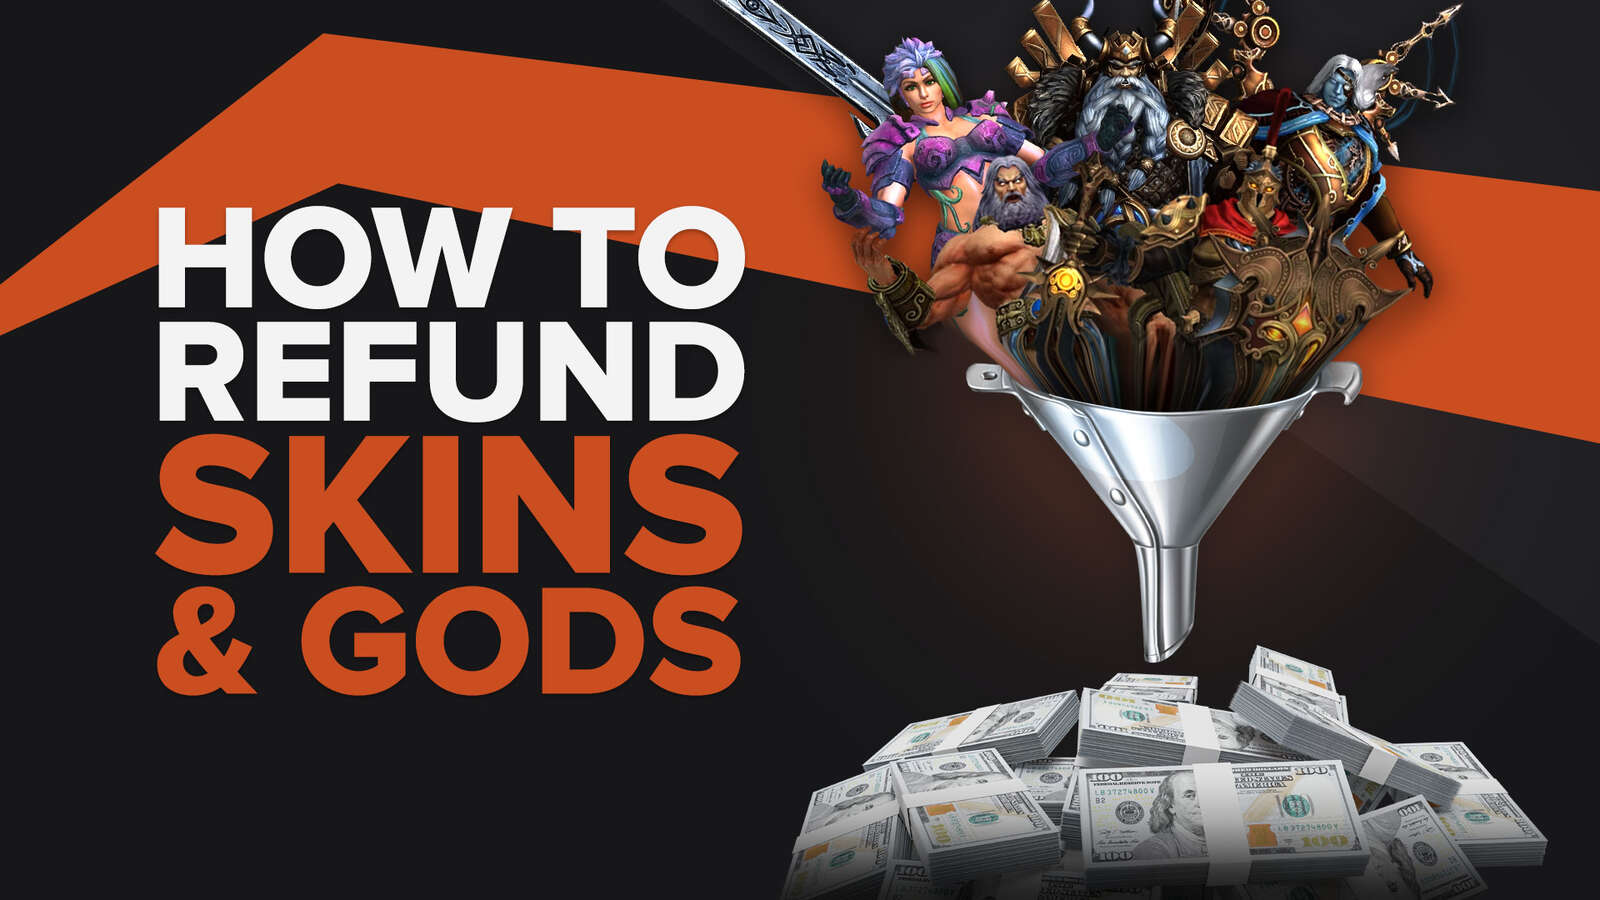 How to Refund God or Skin Purchases in Smite (Easily)